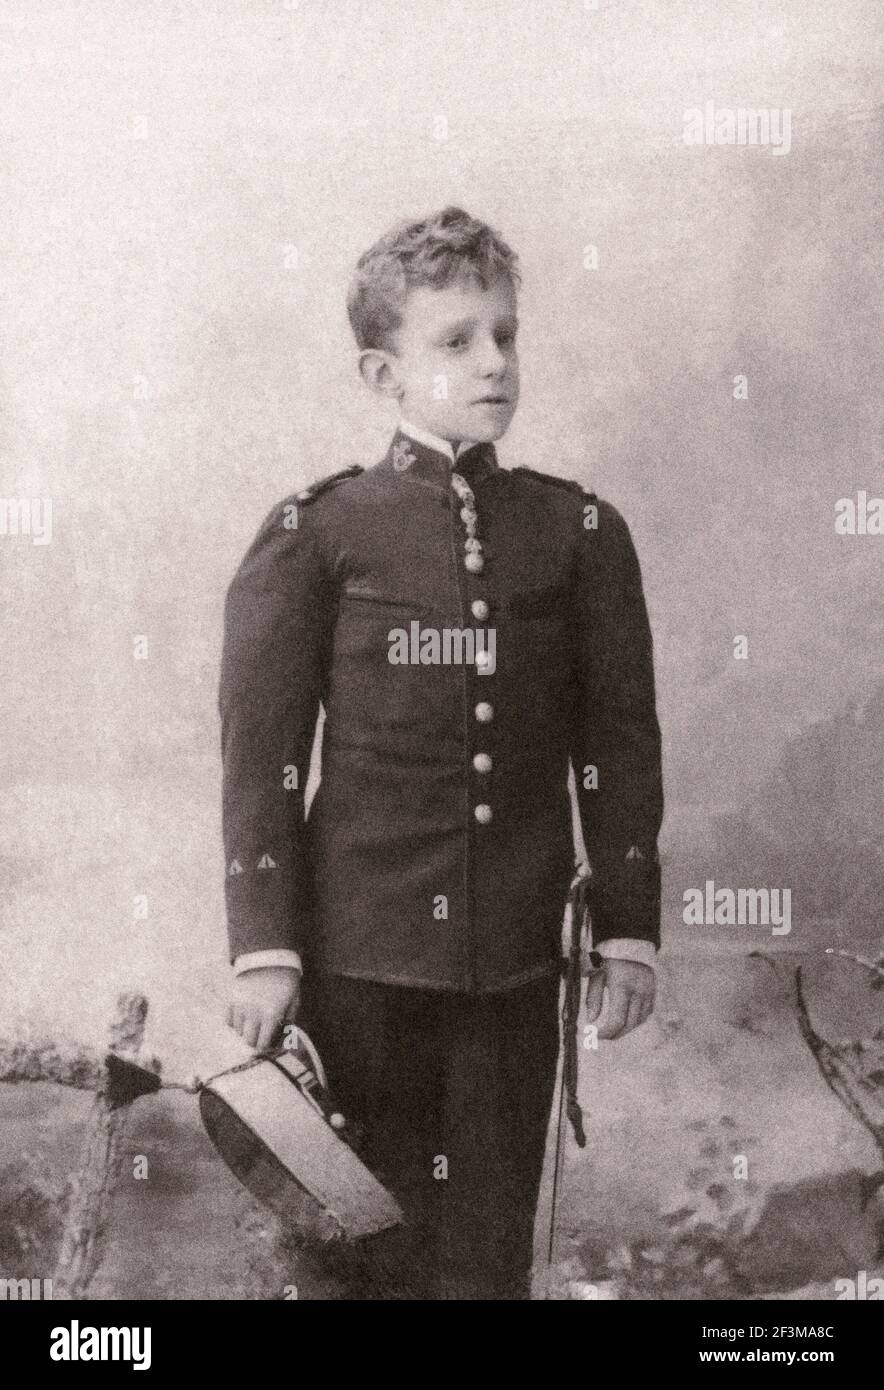 Retor photo of young Alphonse XIII of Spain. Alfonso XIII (1886 – 1941), also known as El Africano or the African, was King of Spain from 1886 until t Stock Photo